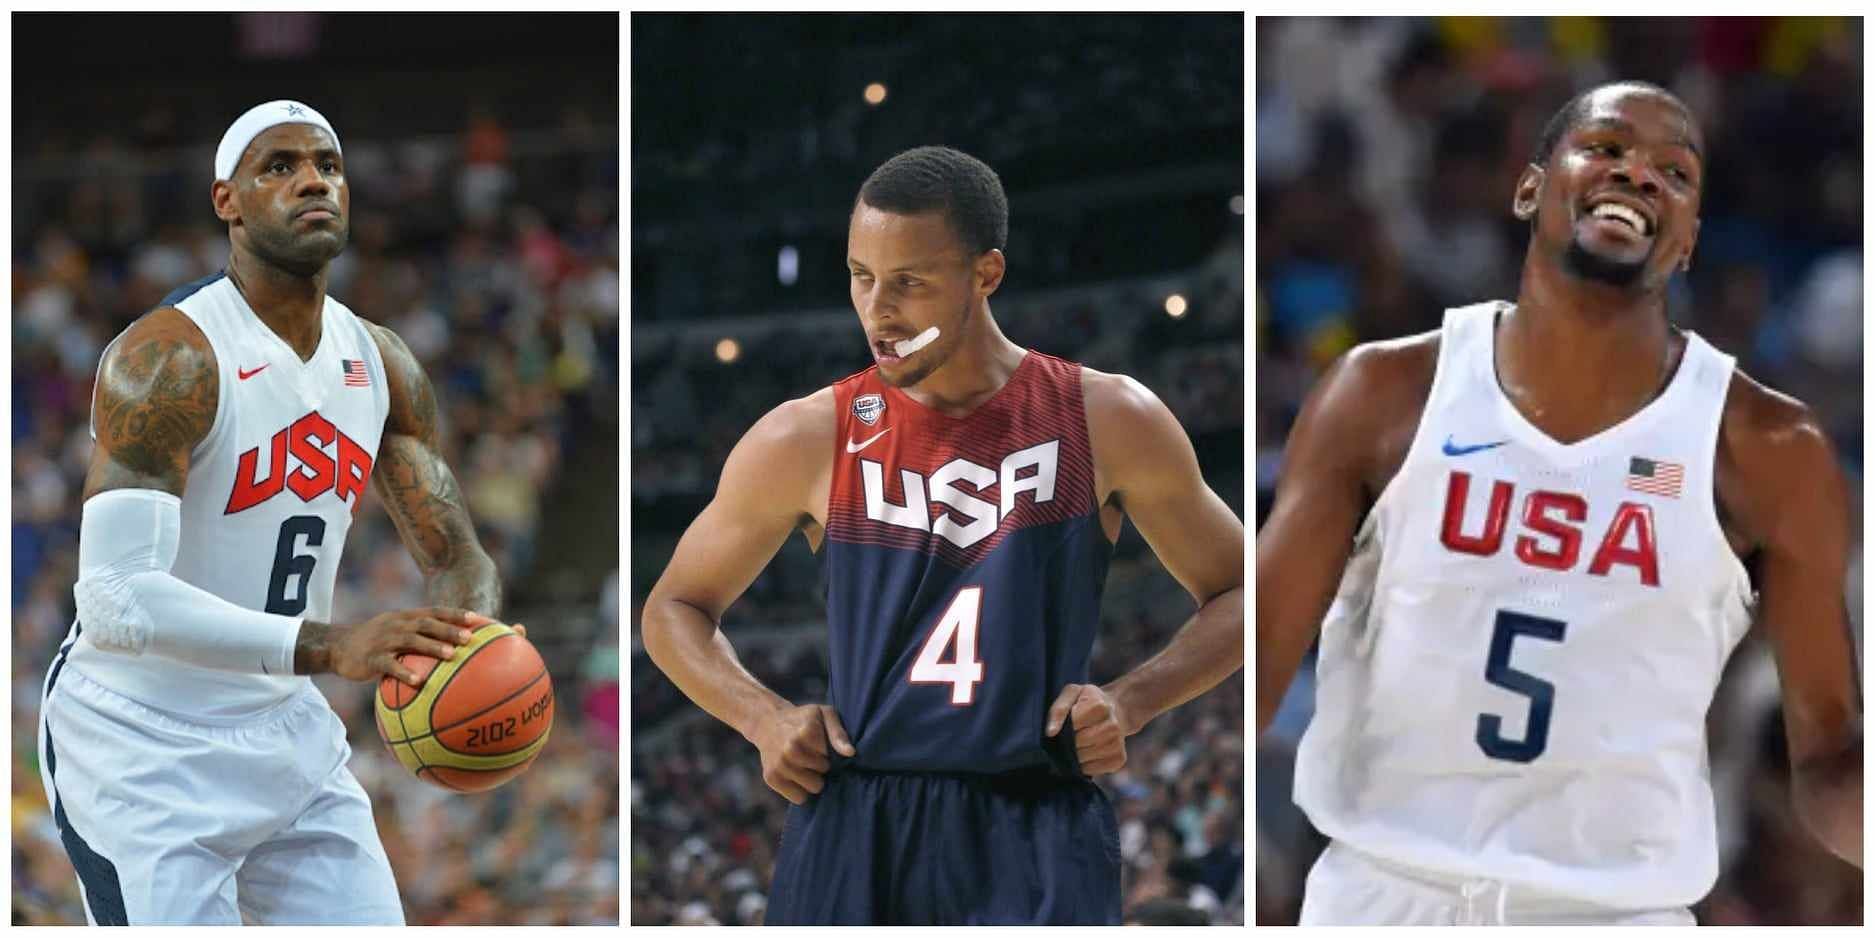 LeBron James, Stephen Curry and LeBron James have expressed their interest to play for Team USA in the 2024 Olympic Games